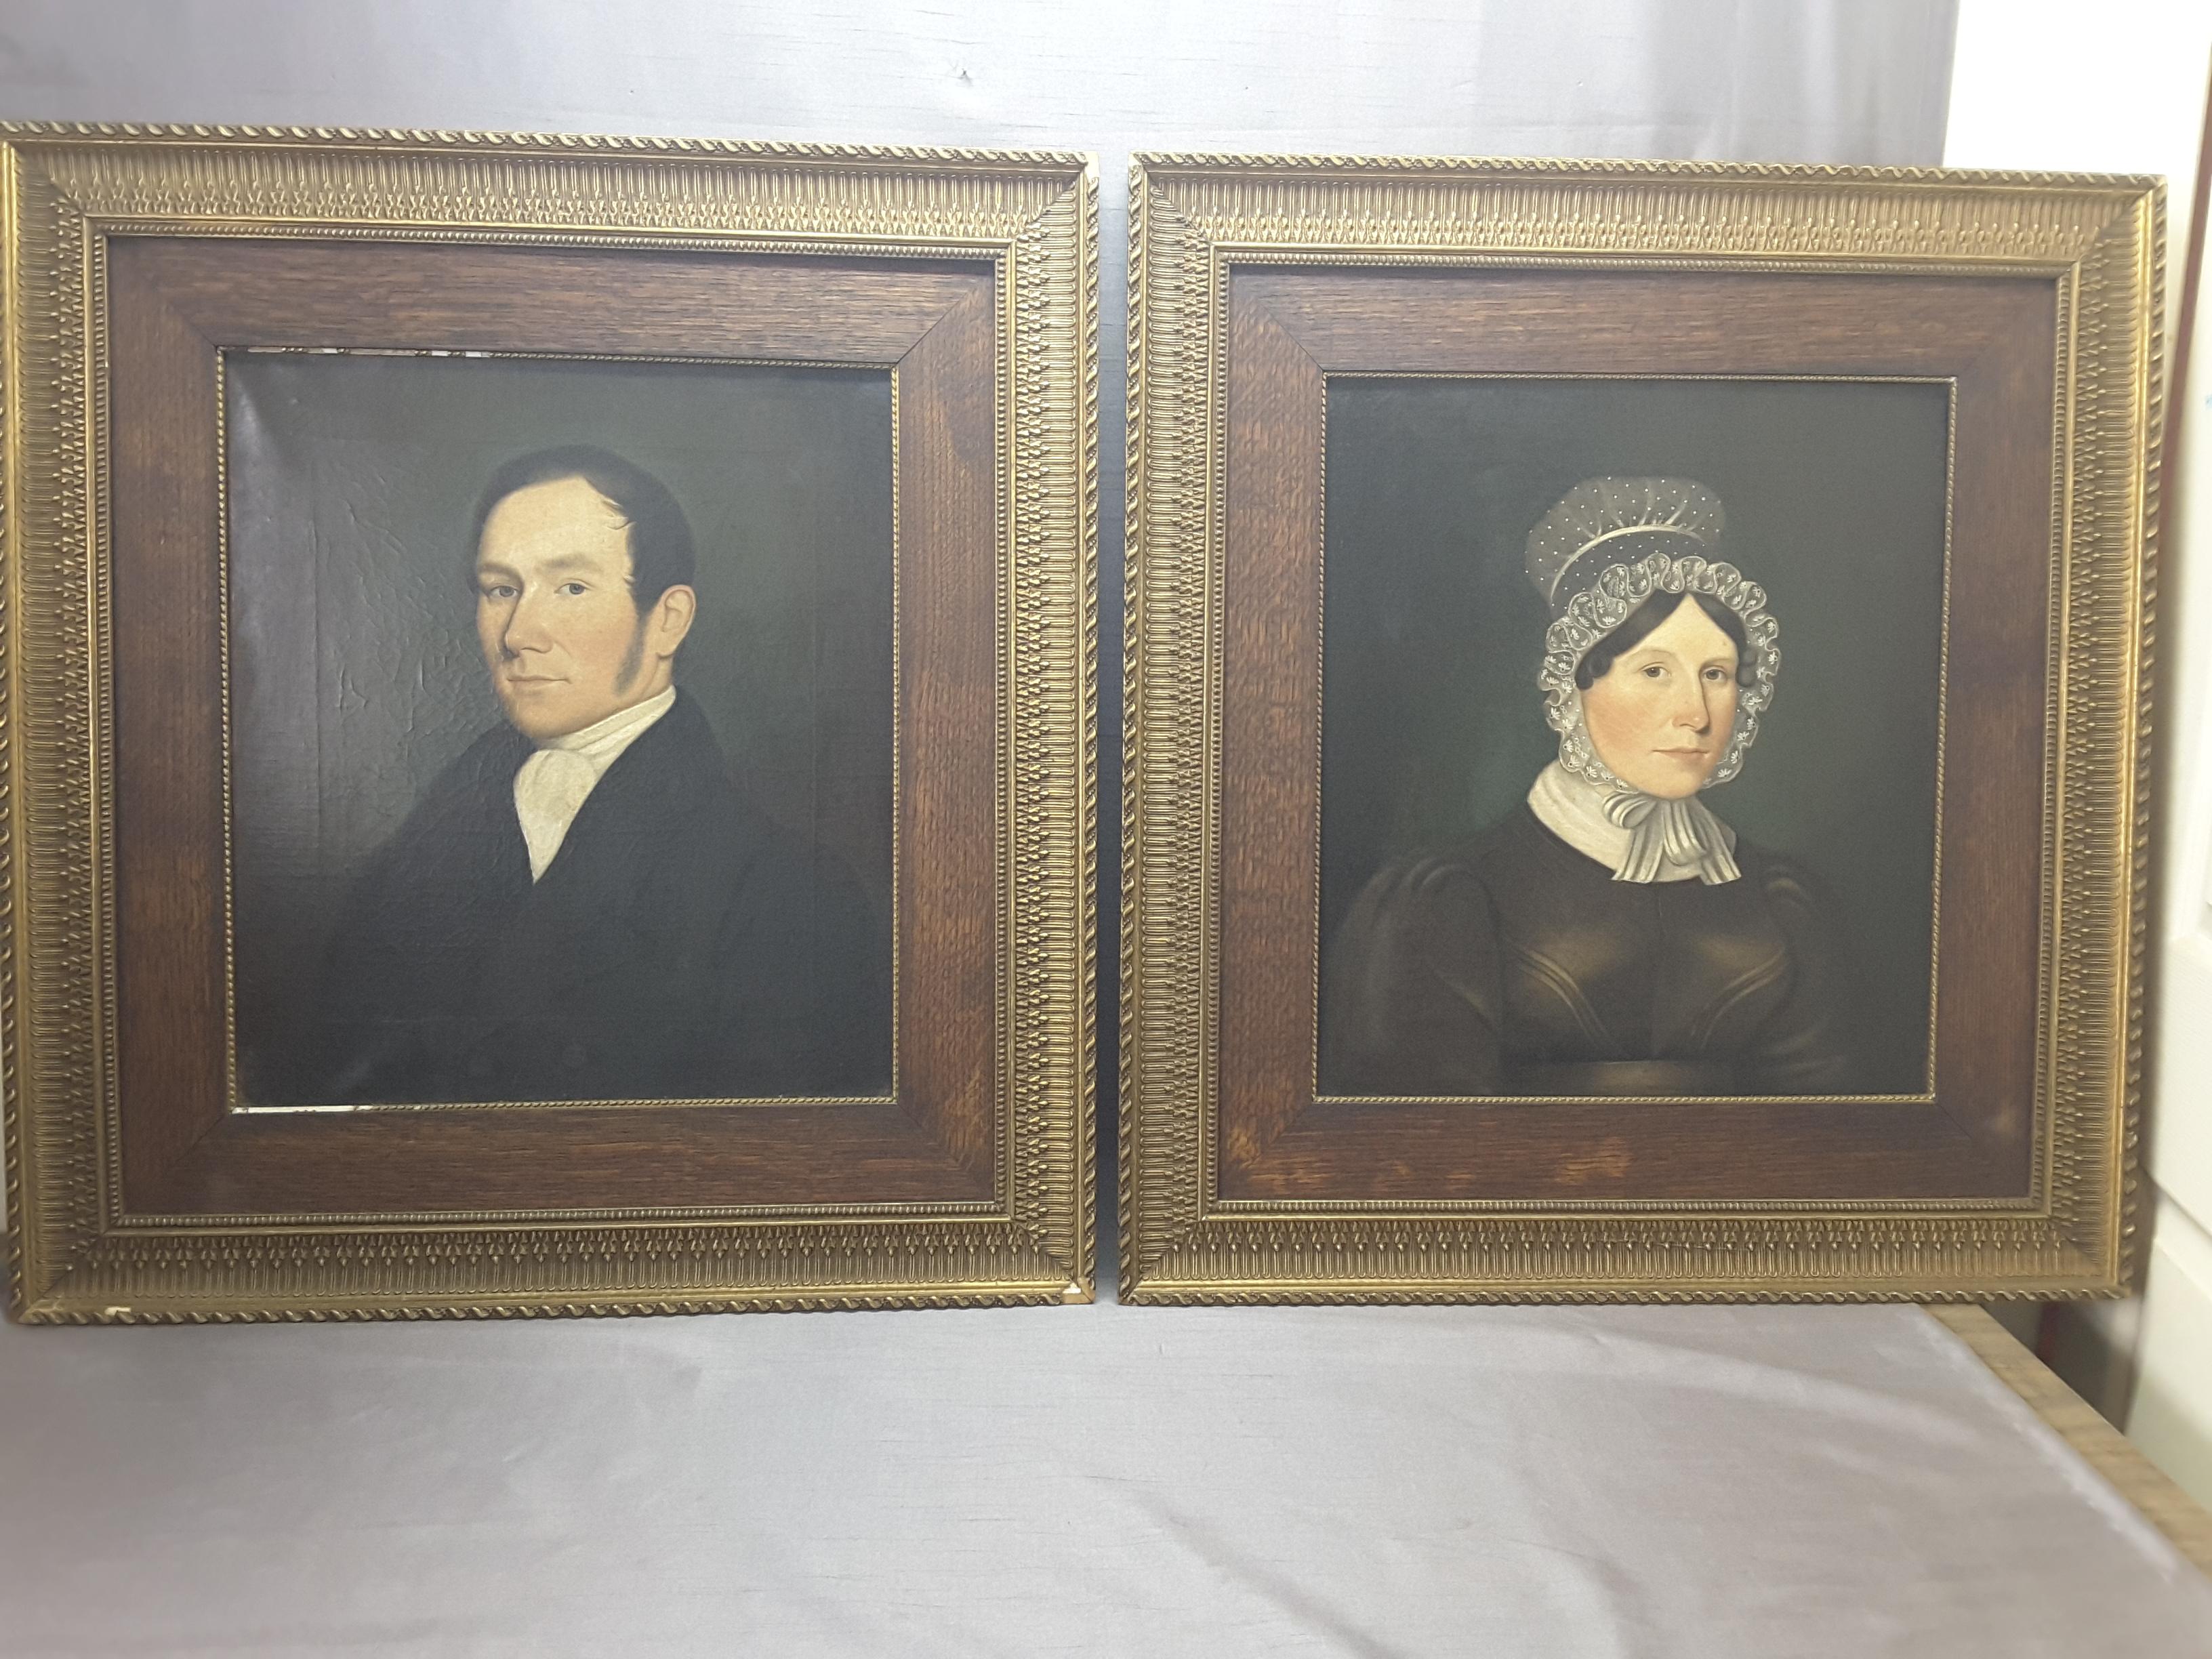 A pair of Georgian English 19th century portraits of a gentleman and a woman, oil on canvas, original frame and stretcher, crackle paint (stable condition) typical of older paintings of this vintage. The paintings are marked on verso, Painted by